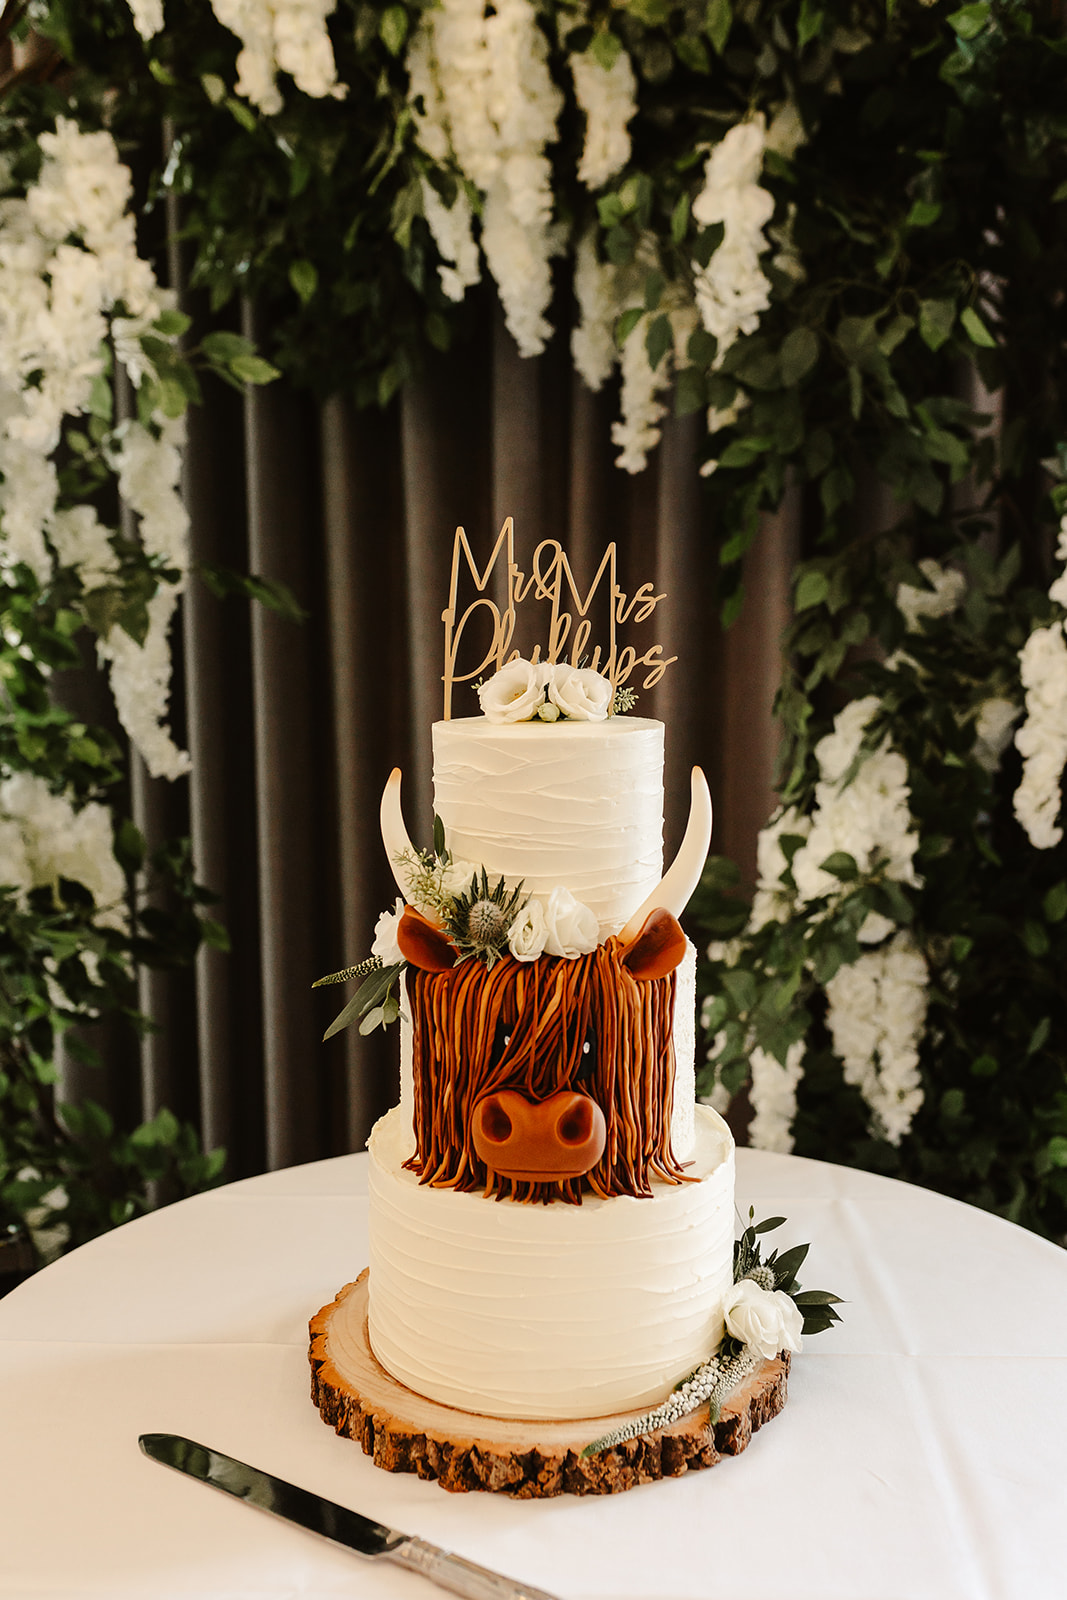 Cake inspired by highland cows